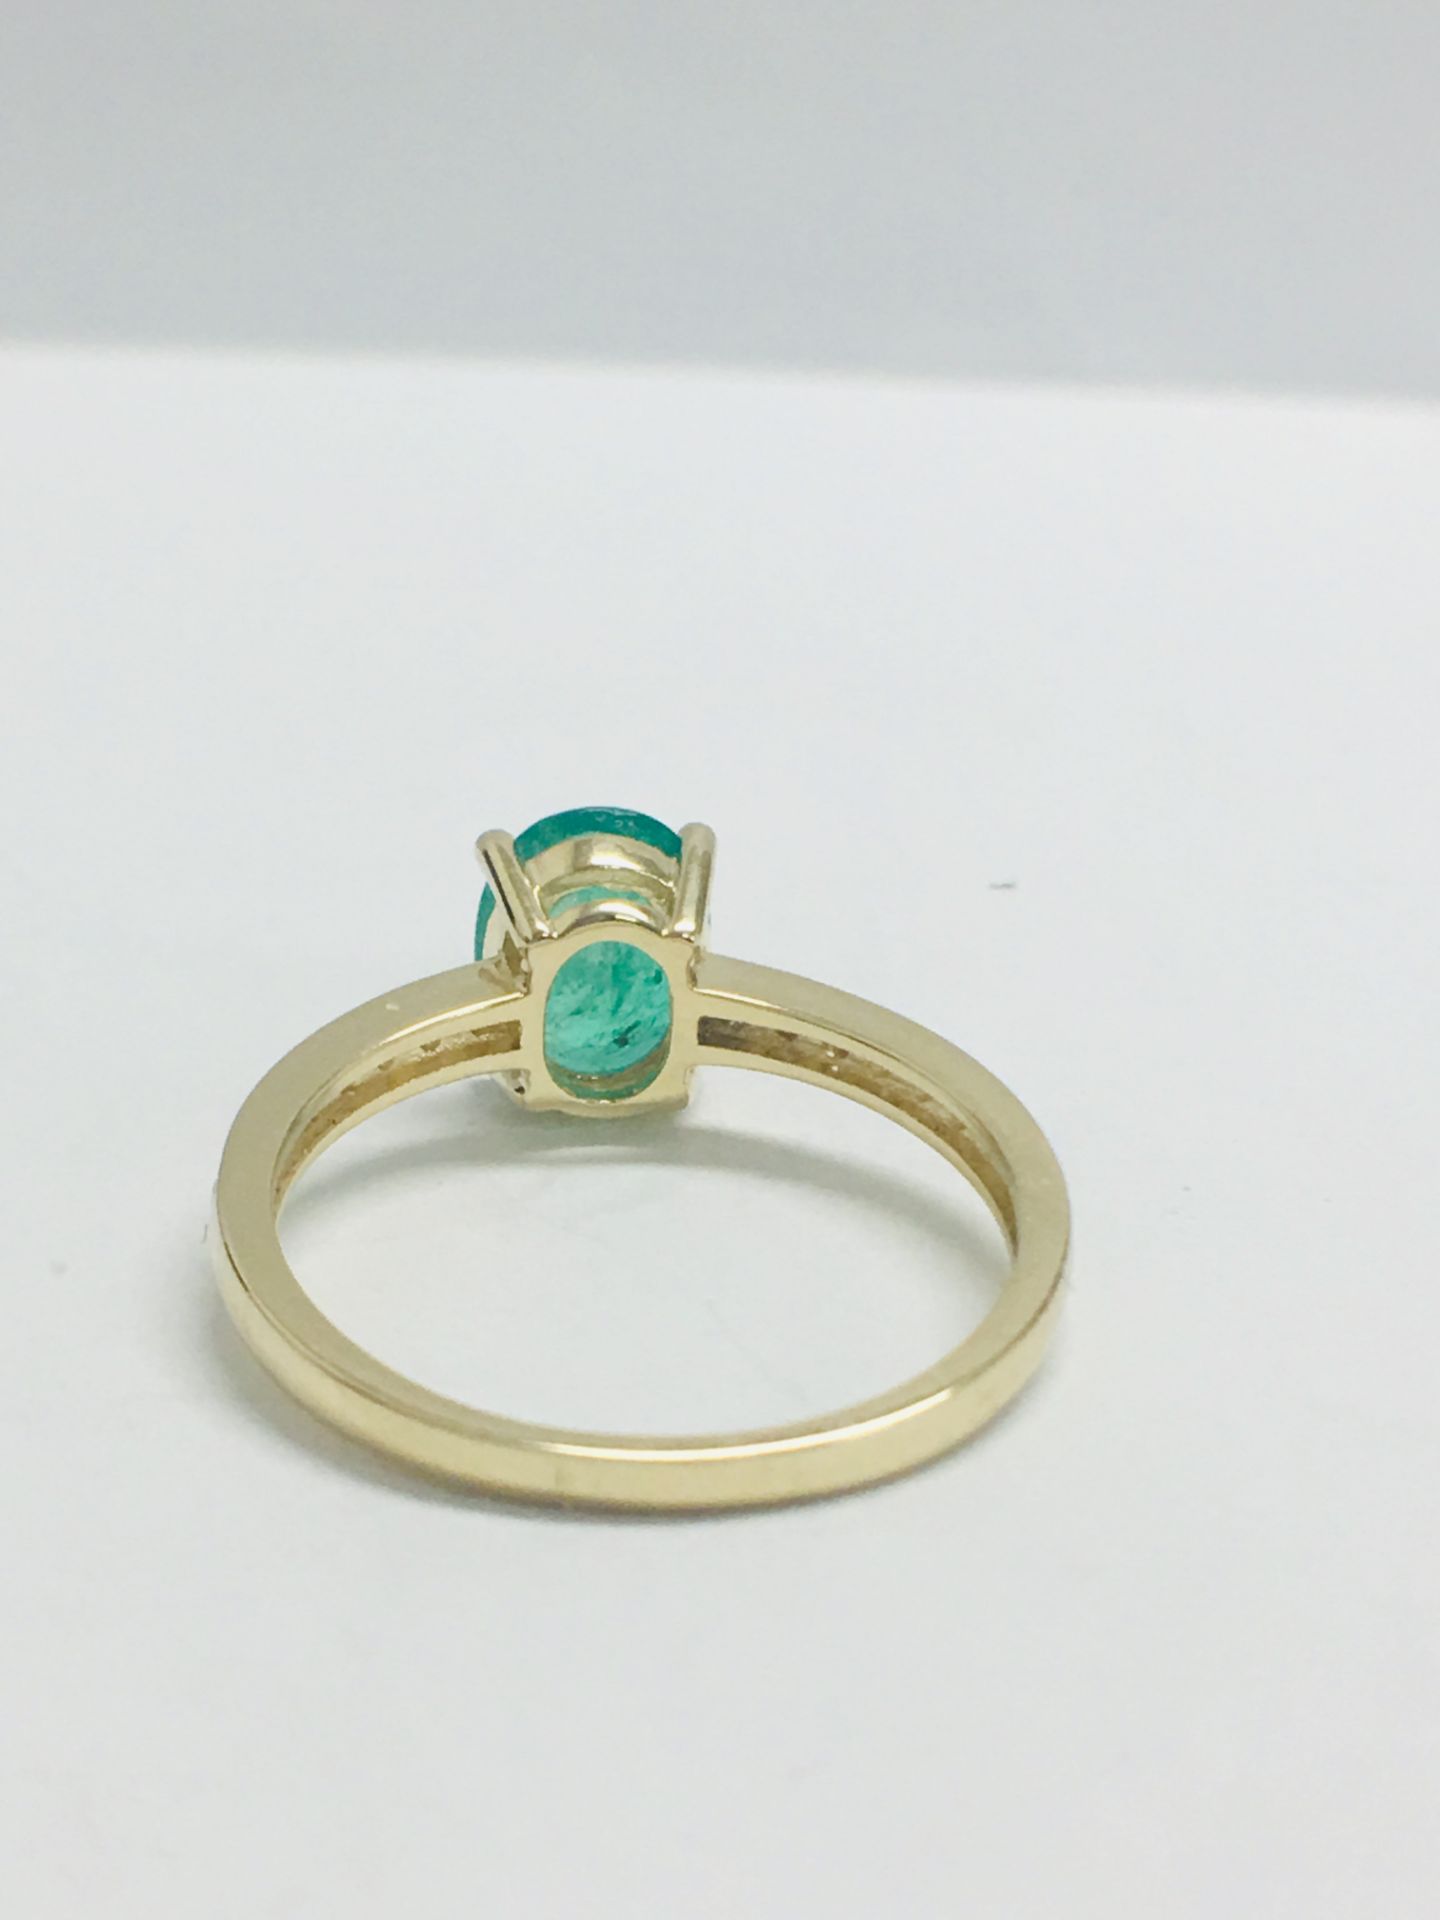 14ct Yellow Gold Emerald and Diamond Ring - Image 4 of 7